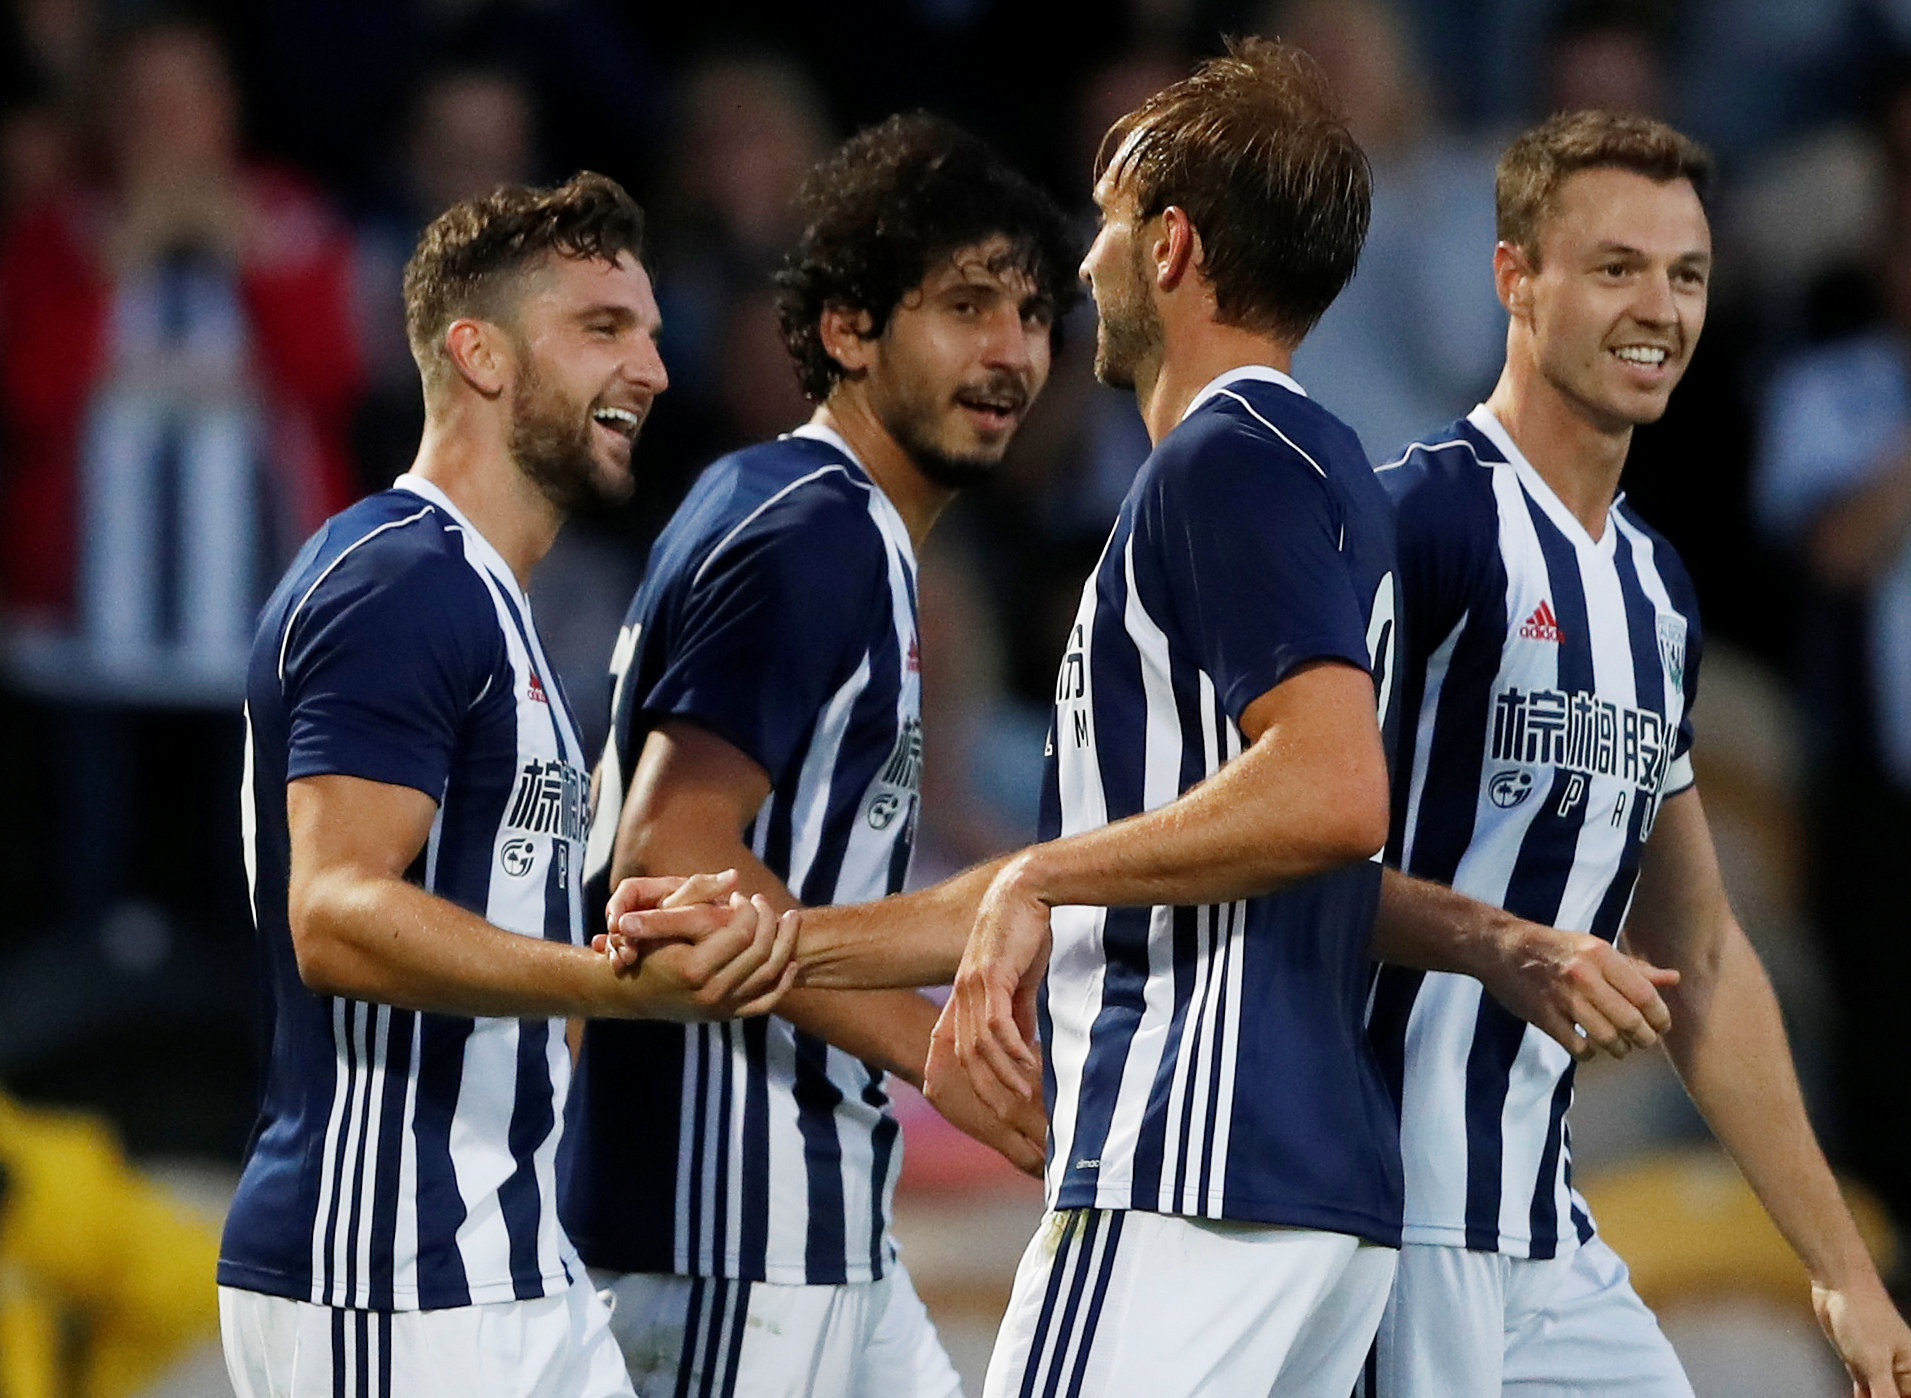 West Brom Transfers 2020 : West Brom New Player Signings 2020/21